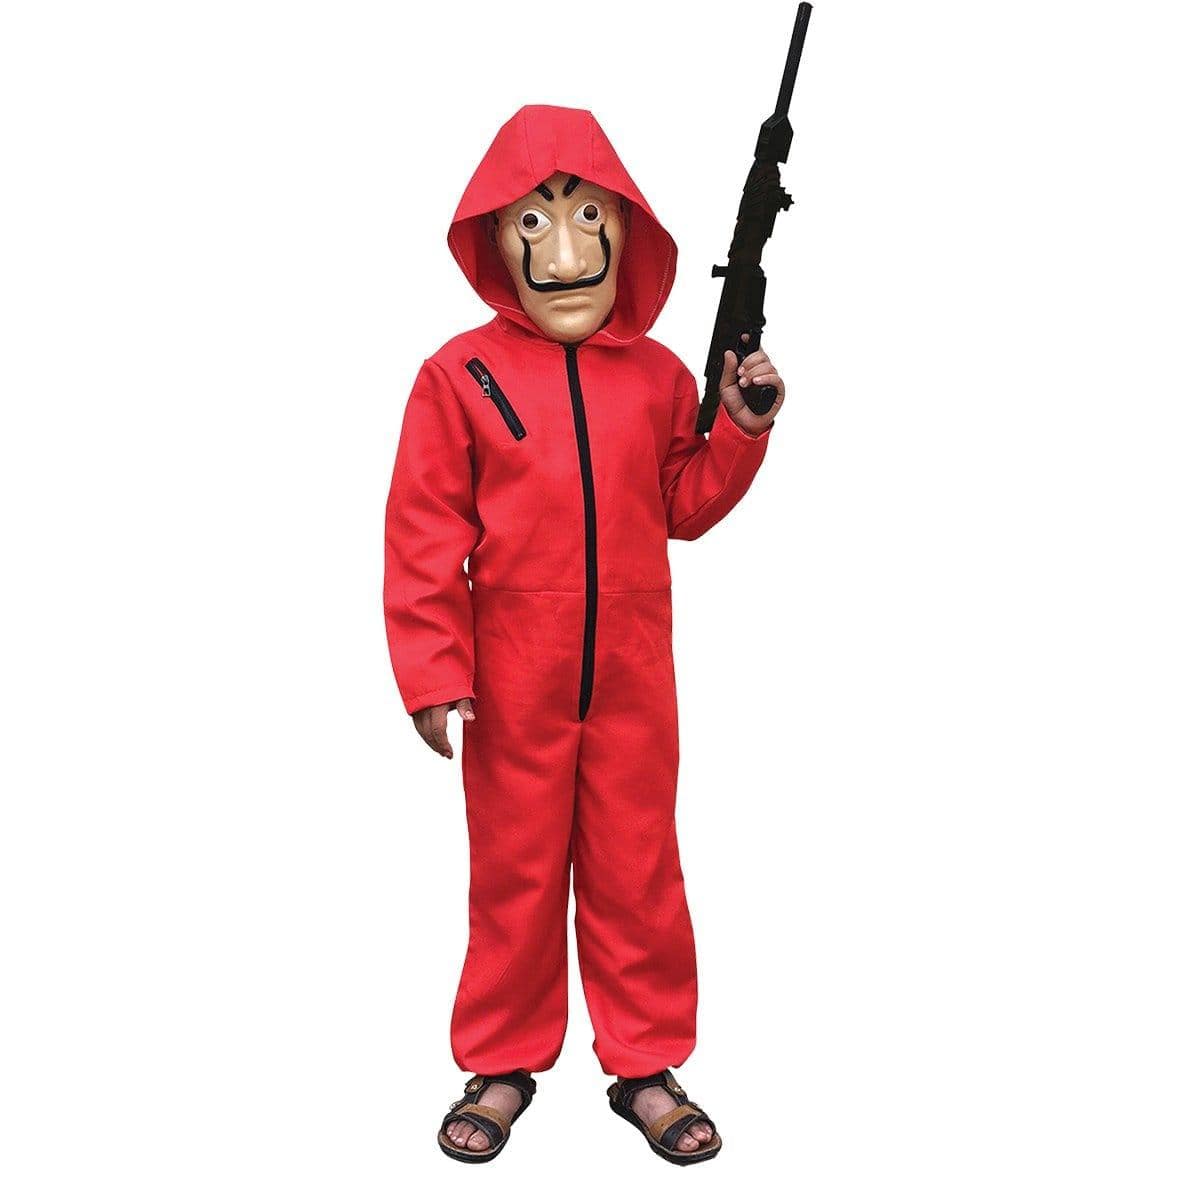 Buy Costumes Casa de Papel Costume & Mask for Kids, Money Heist Season 5 sold at Party Expert